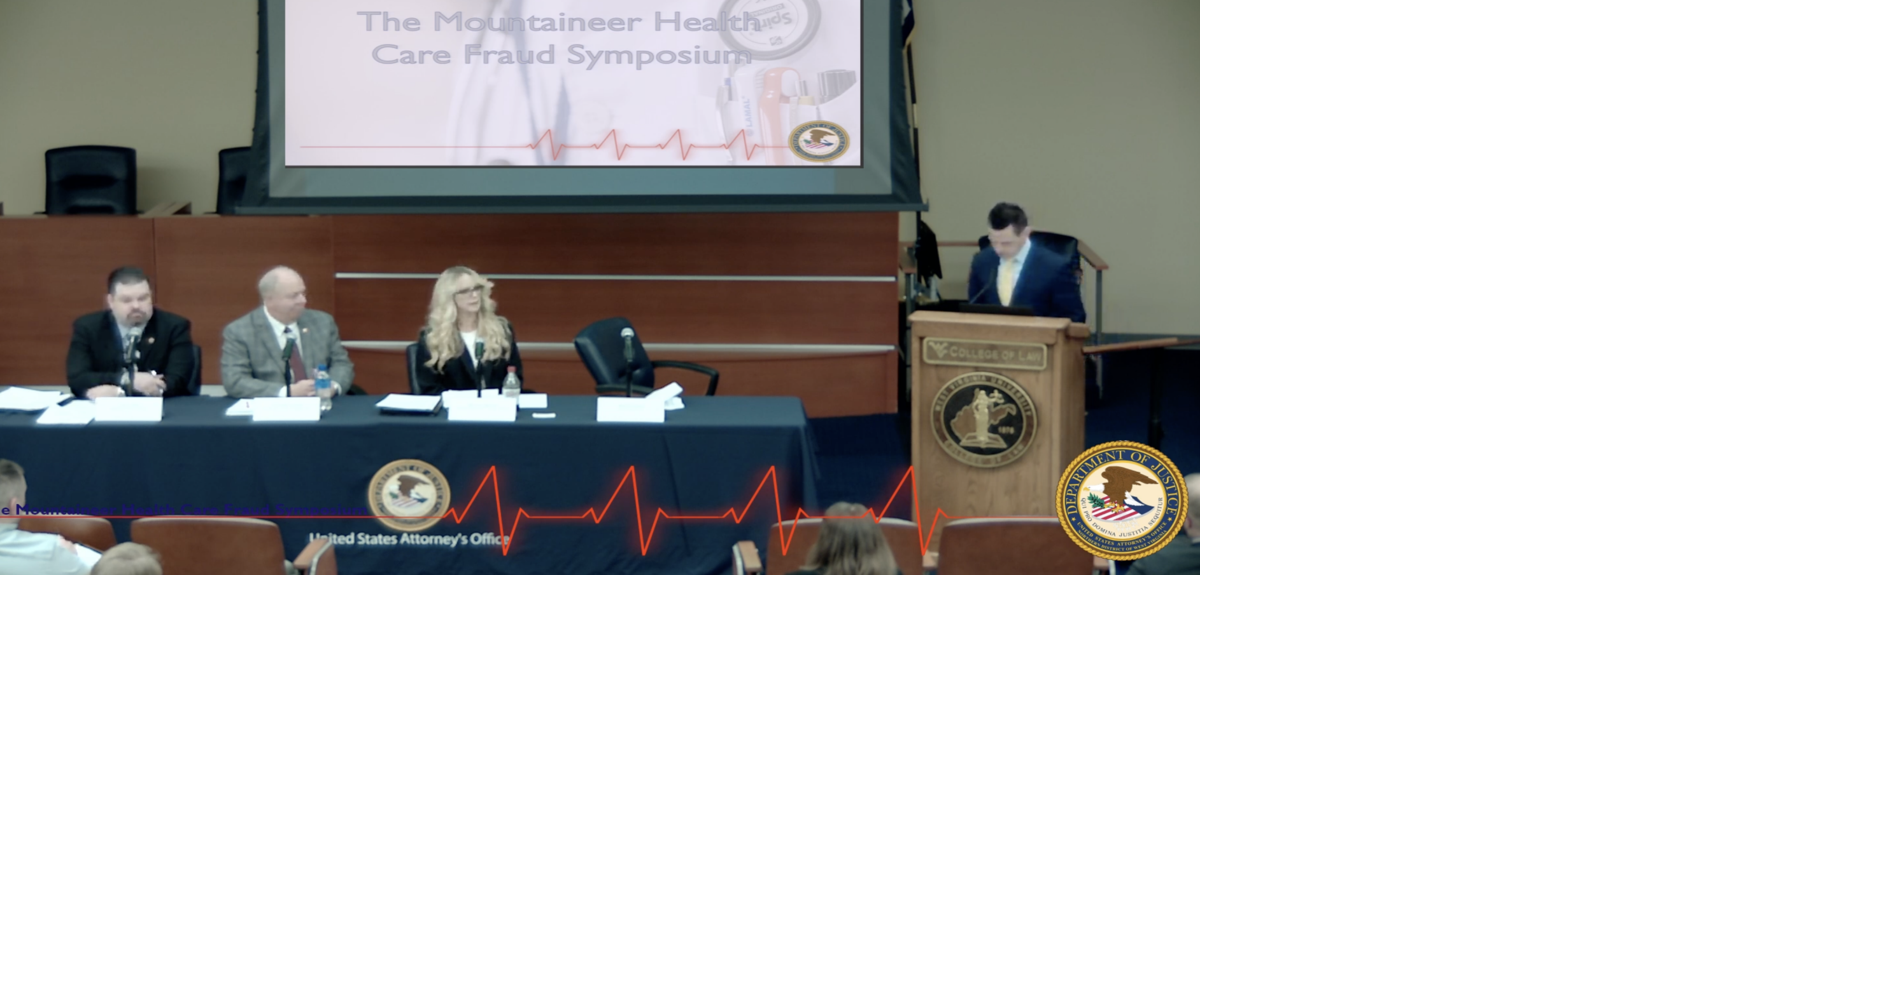 U.S. Attorney for Northern District of West Virginia hosts symposium on health care fraud